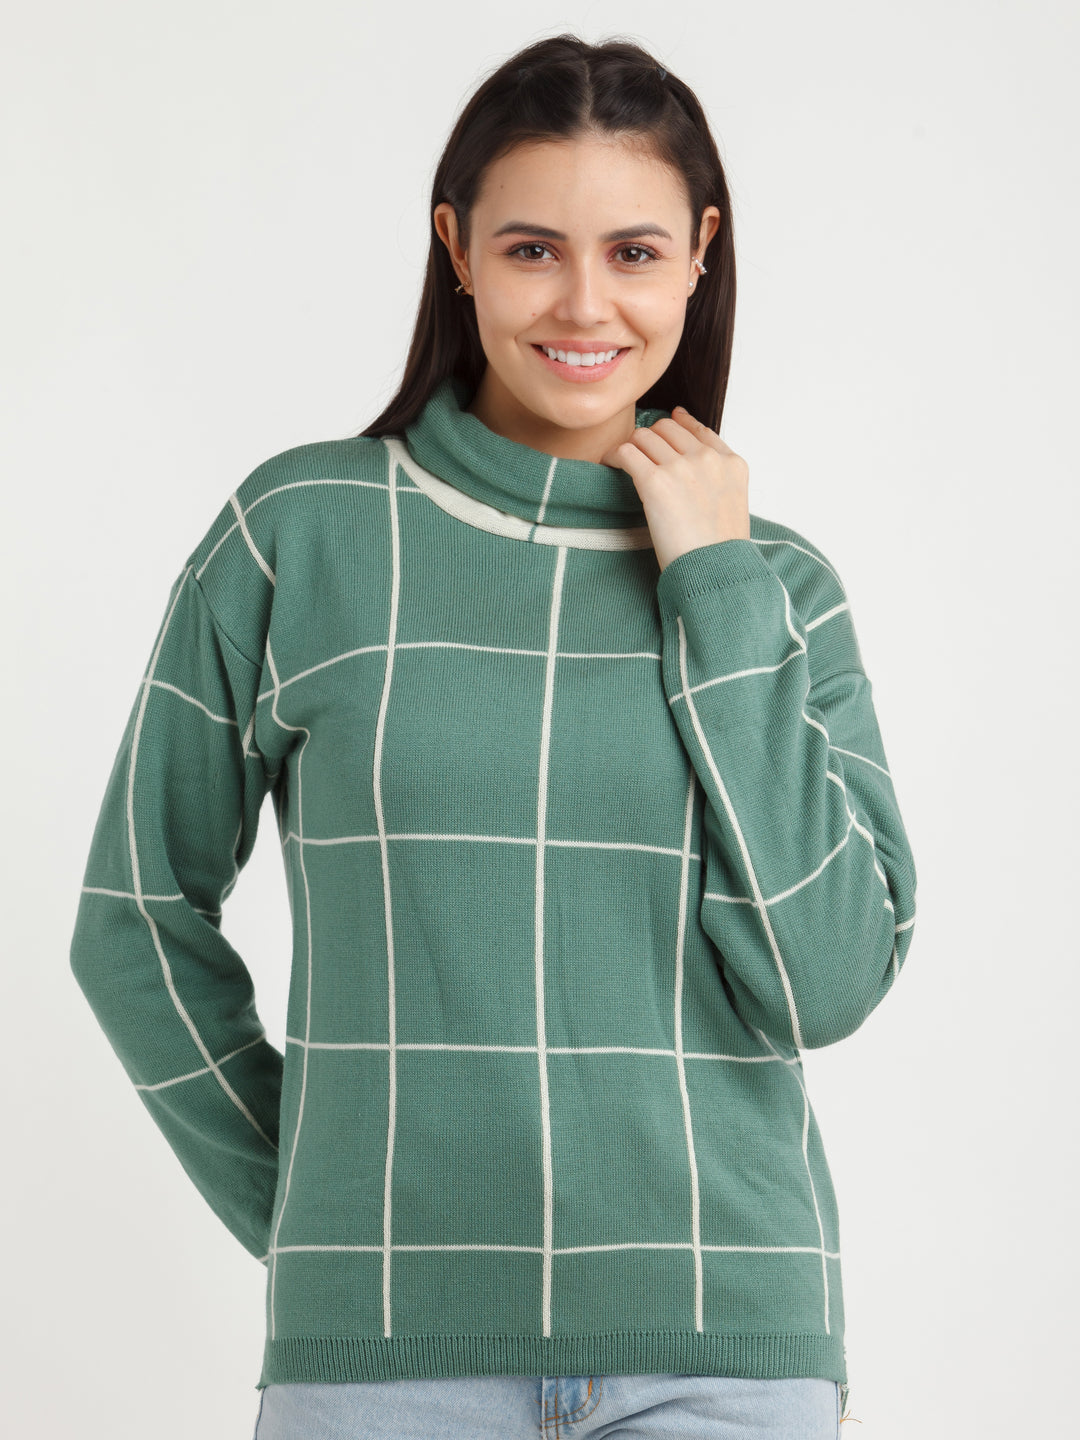 Off White Checked Sweater For Women